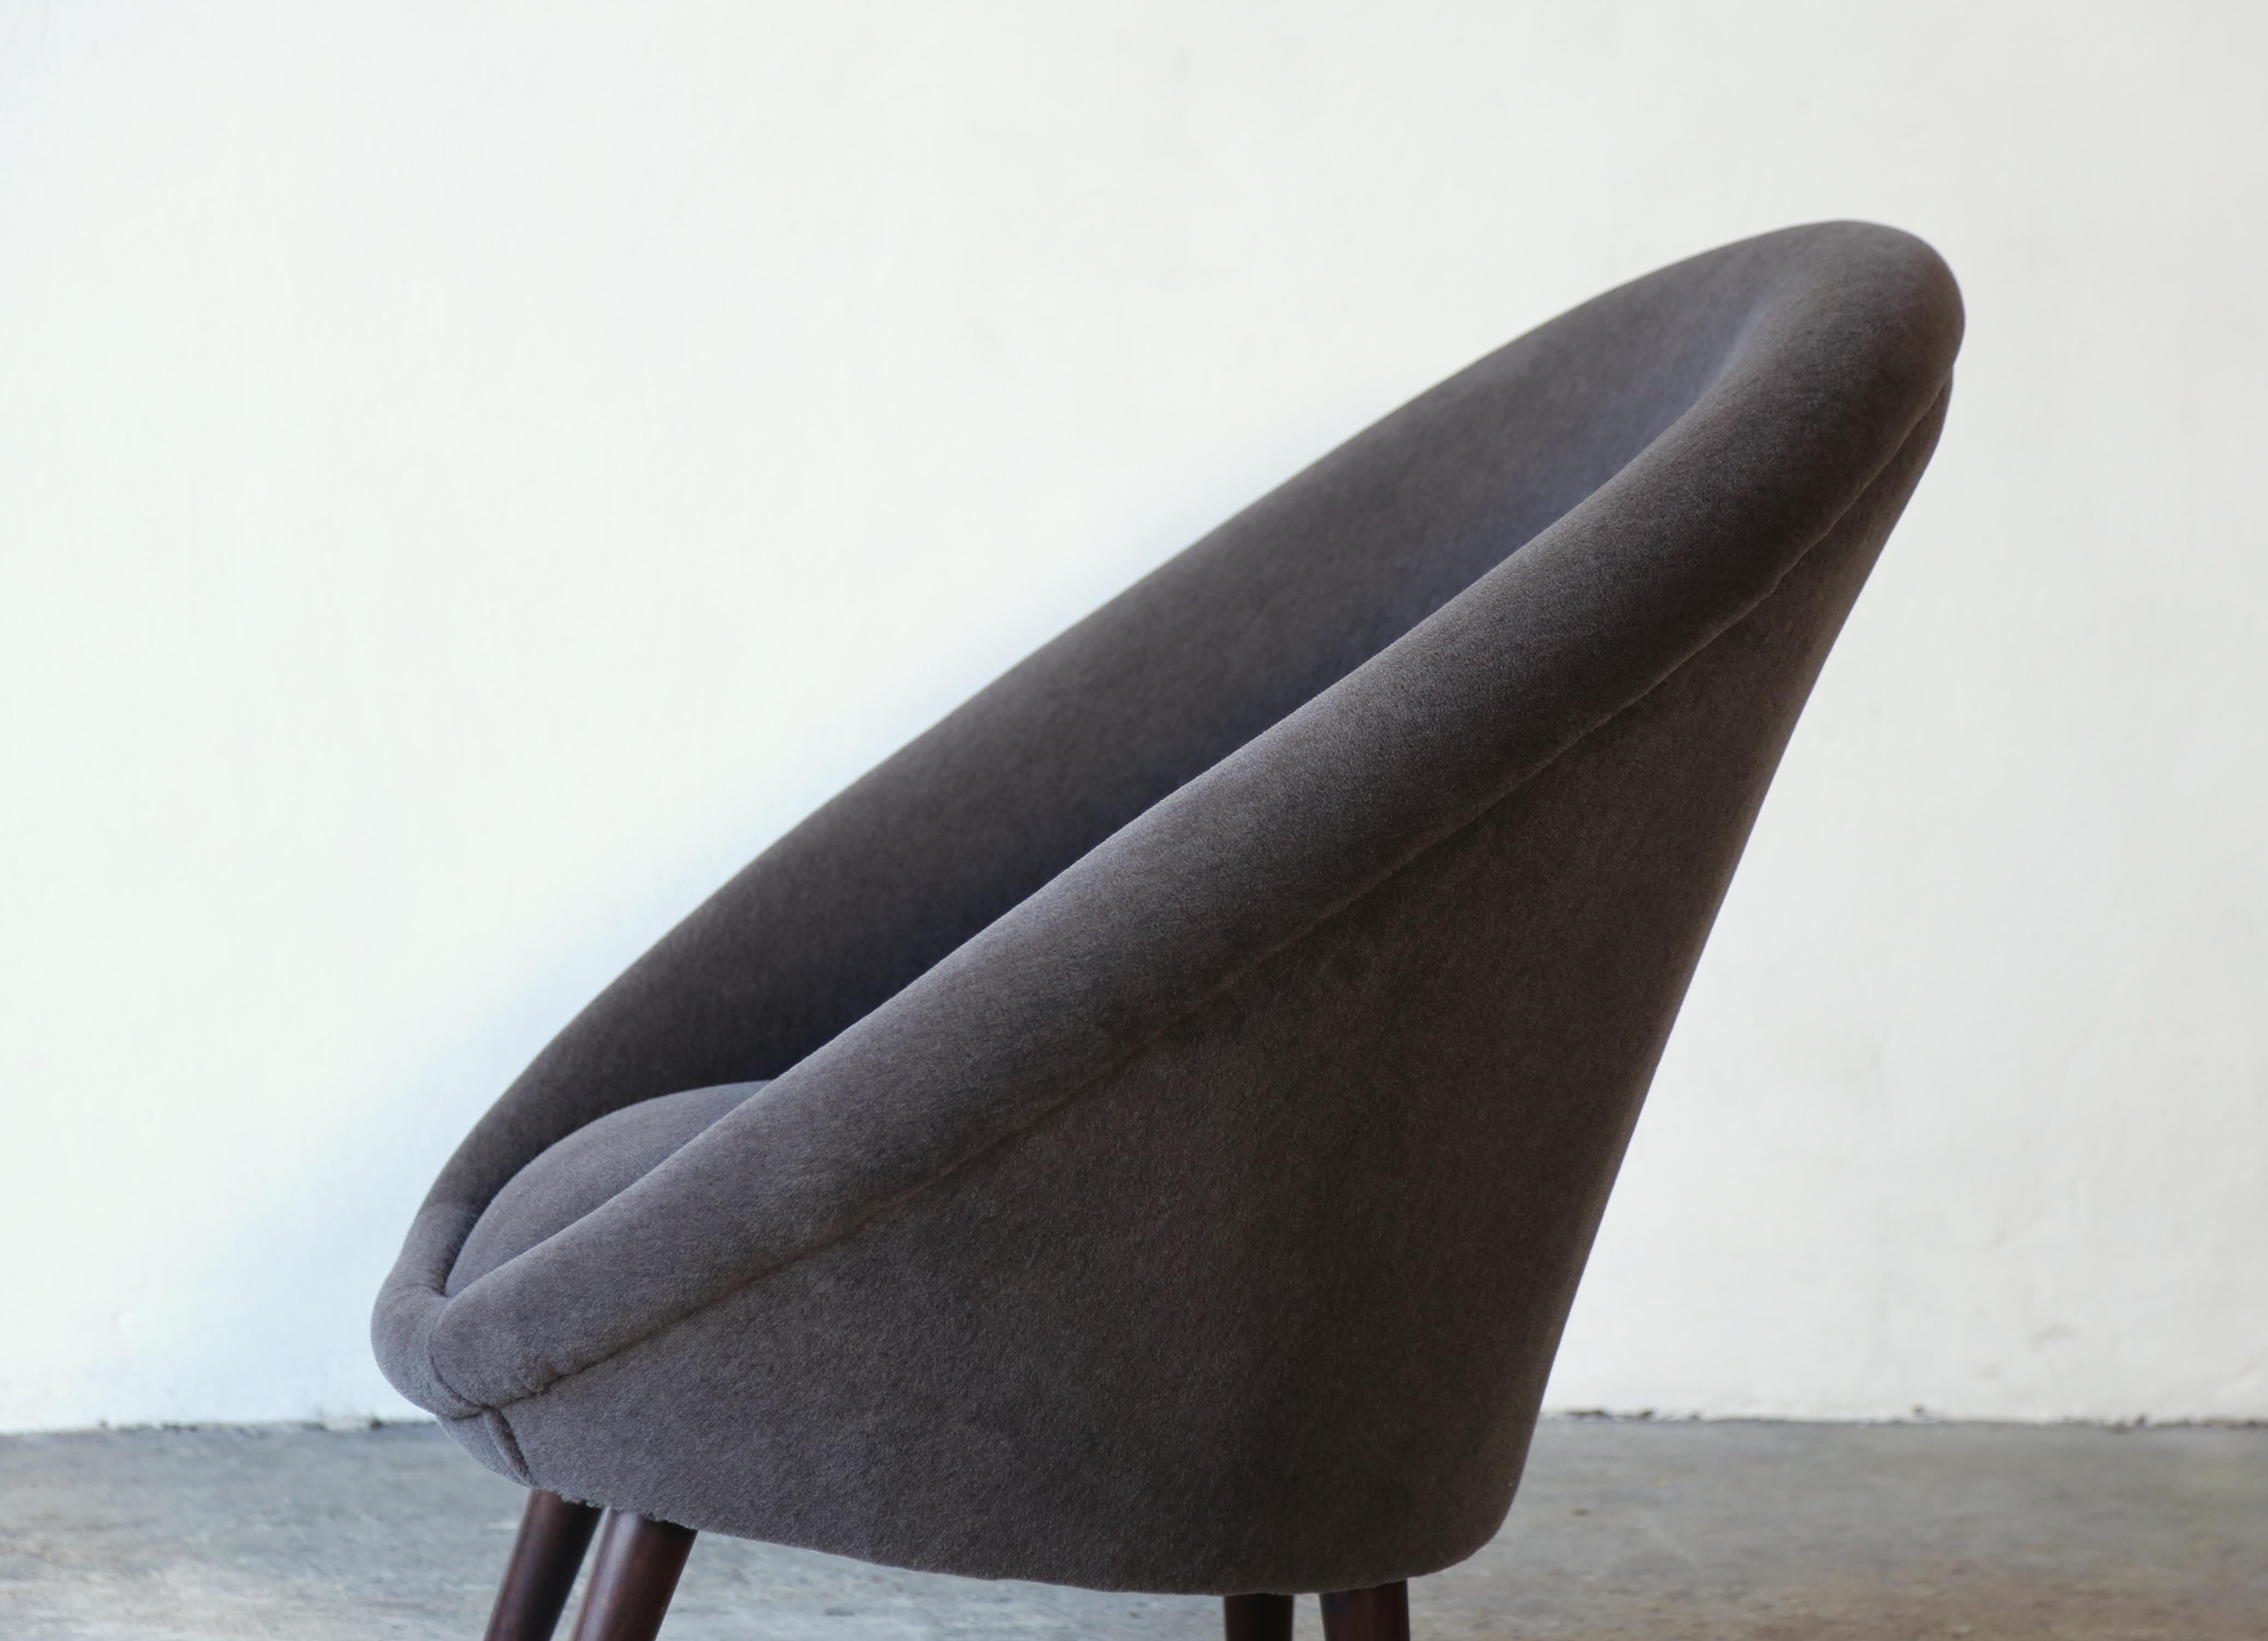 20th Century A 1960s Italian Egg Chair, Newly Upholstered in Alpaca